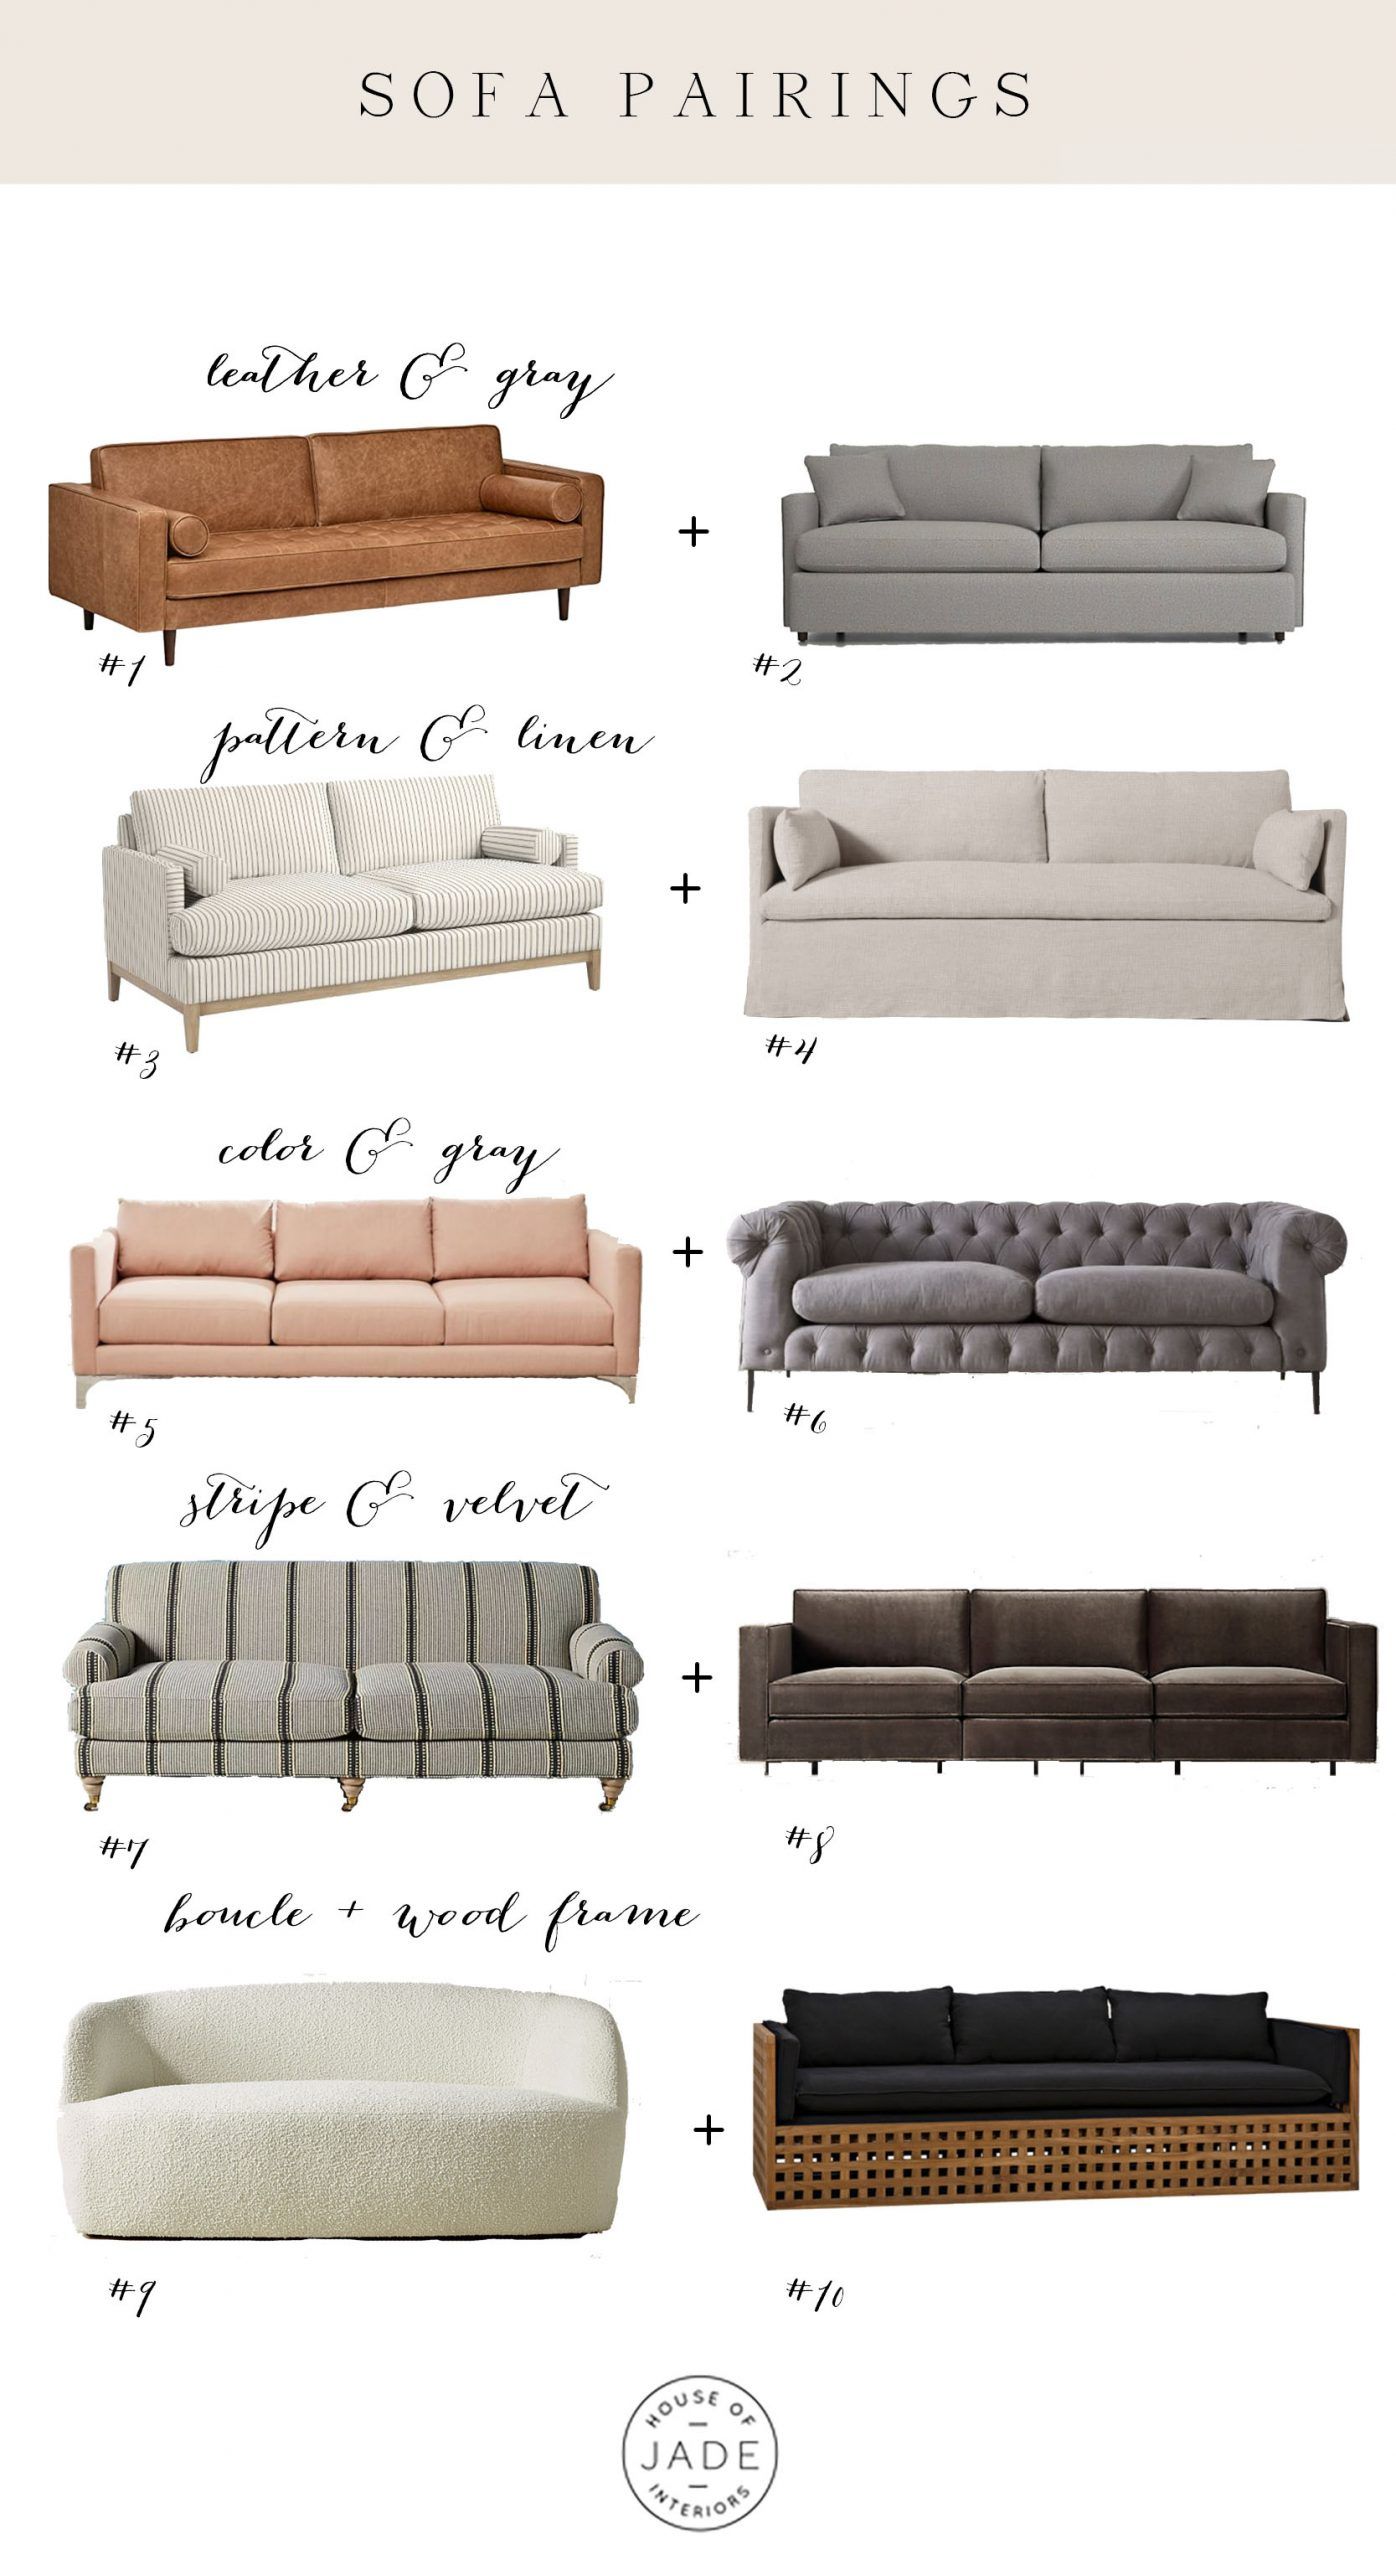 Sofa Pairing Tips | House Of Jade Interiors Throughout Sofas In Multiple Colors (View 7 of 15)